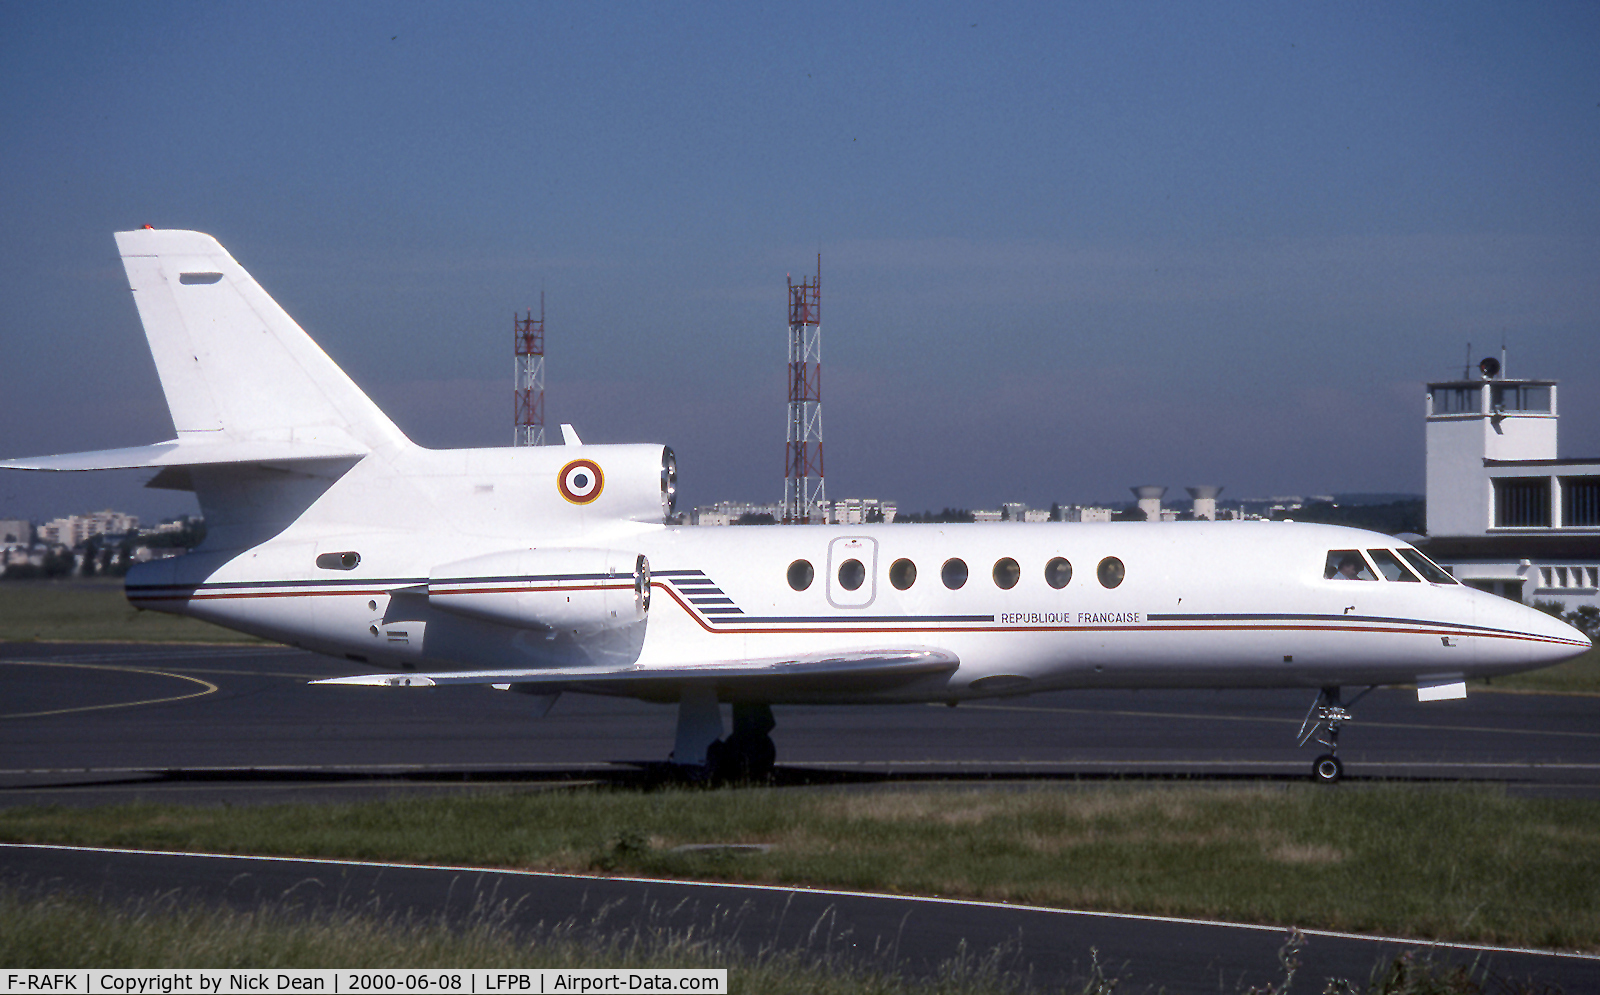 F-RAFK, 1980 Dassault Falcon 50 C/N 27, LFPB (S/N and C/N of this frame is 27)